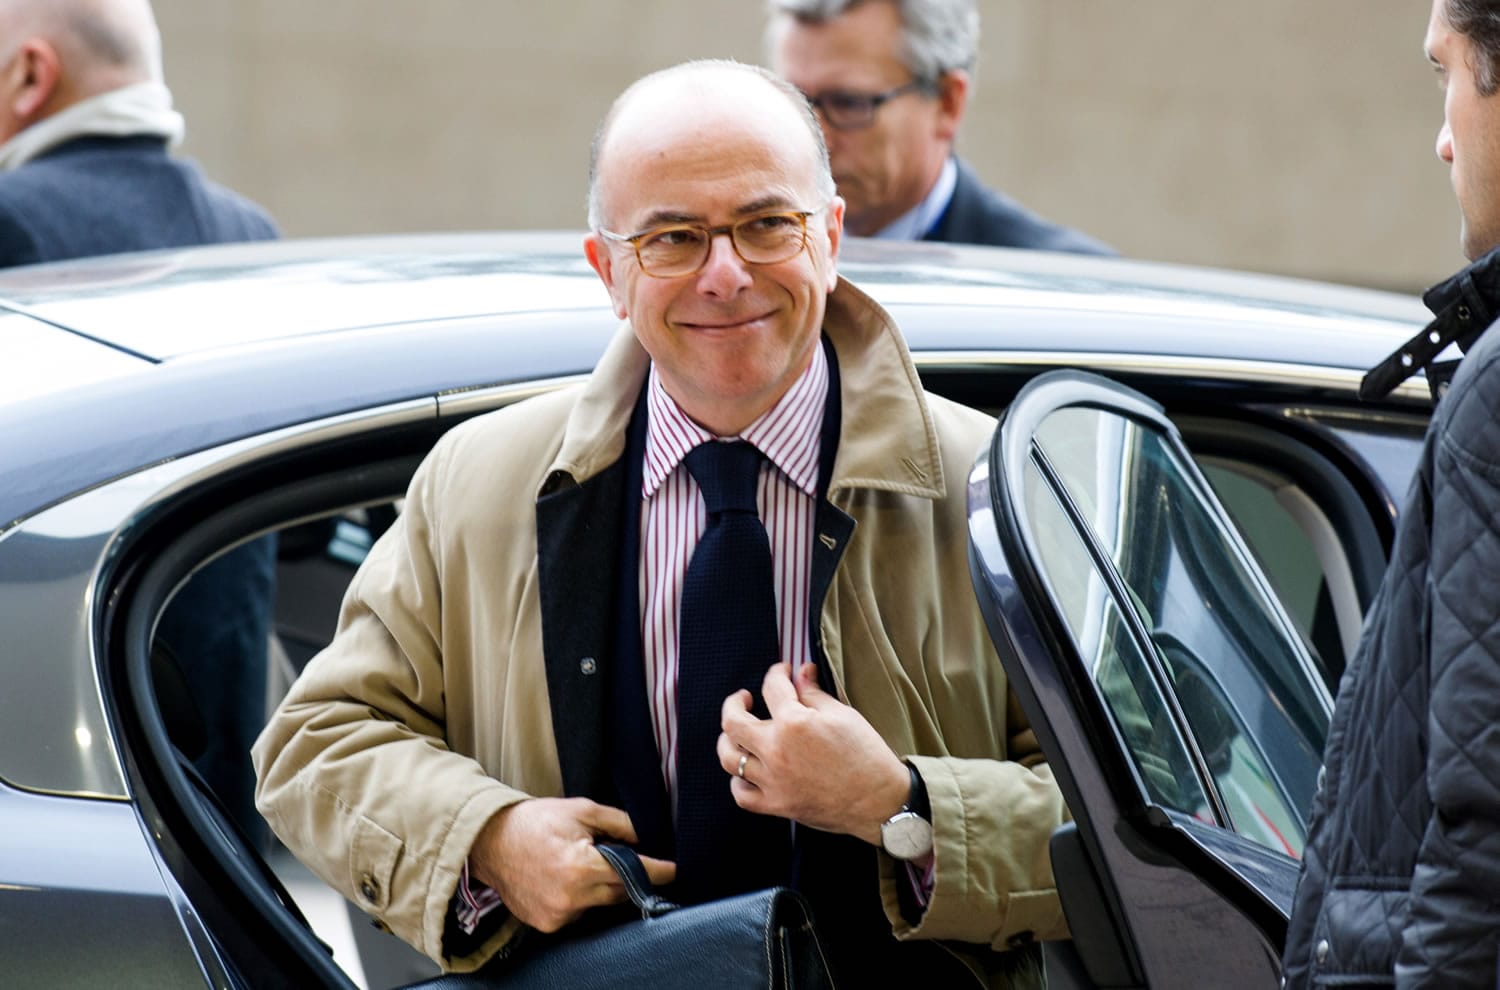 French Interior Minister Bernard Cazeneuve arrives for a meeting of EU justice and interior ministers at the EU Council building in Luxembourg on Thursday. Britain urged the European Union on Thursday to speed the deportation of people who do not qualify for asylum as the EU struggles with its biggest refugee emergency in decades.